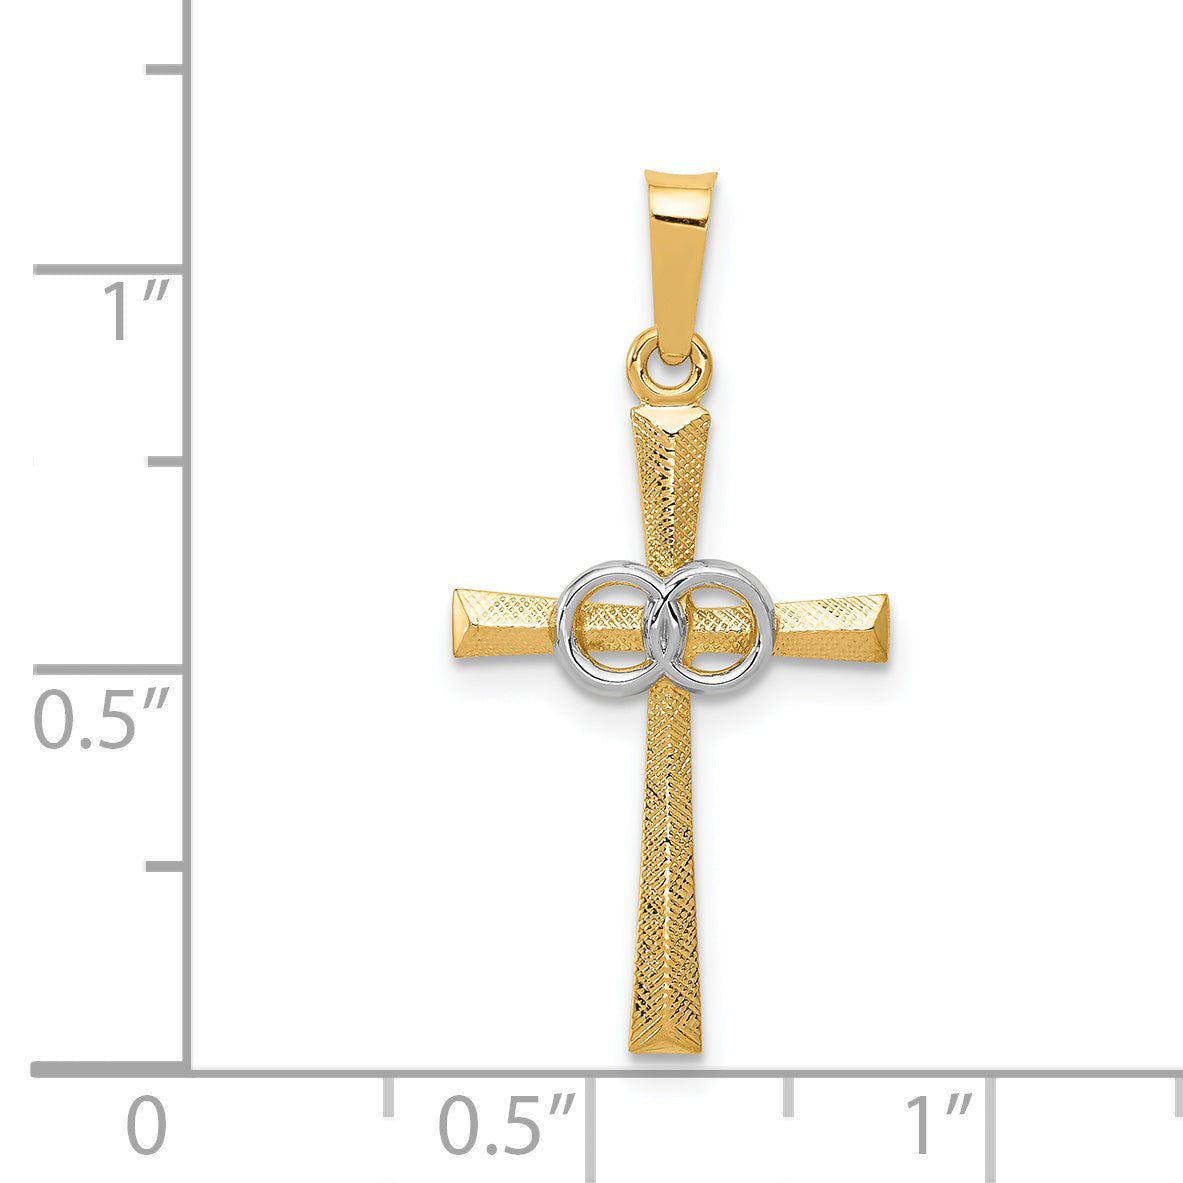 14K Two-tone Textured and Polished Latin Cross w/ Circles Pendant